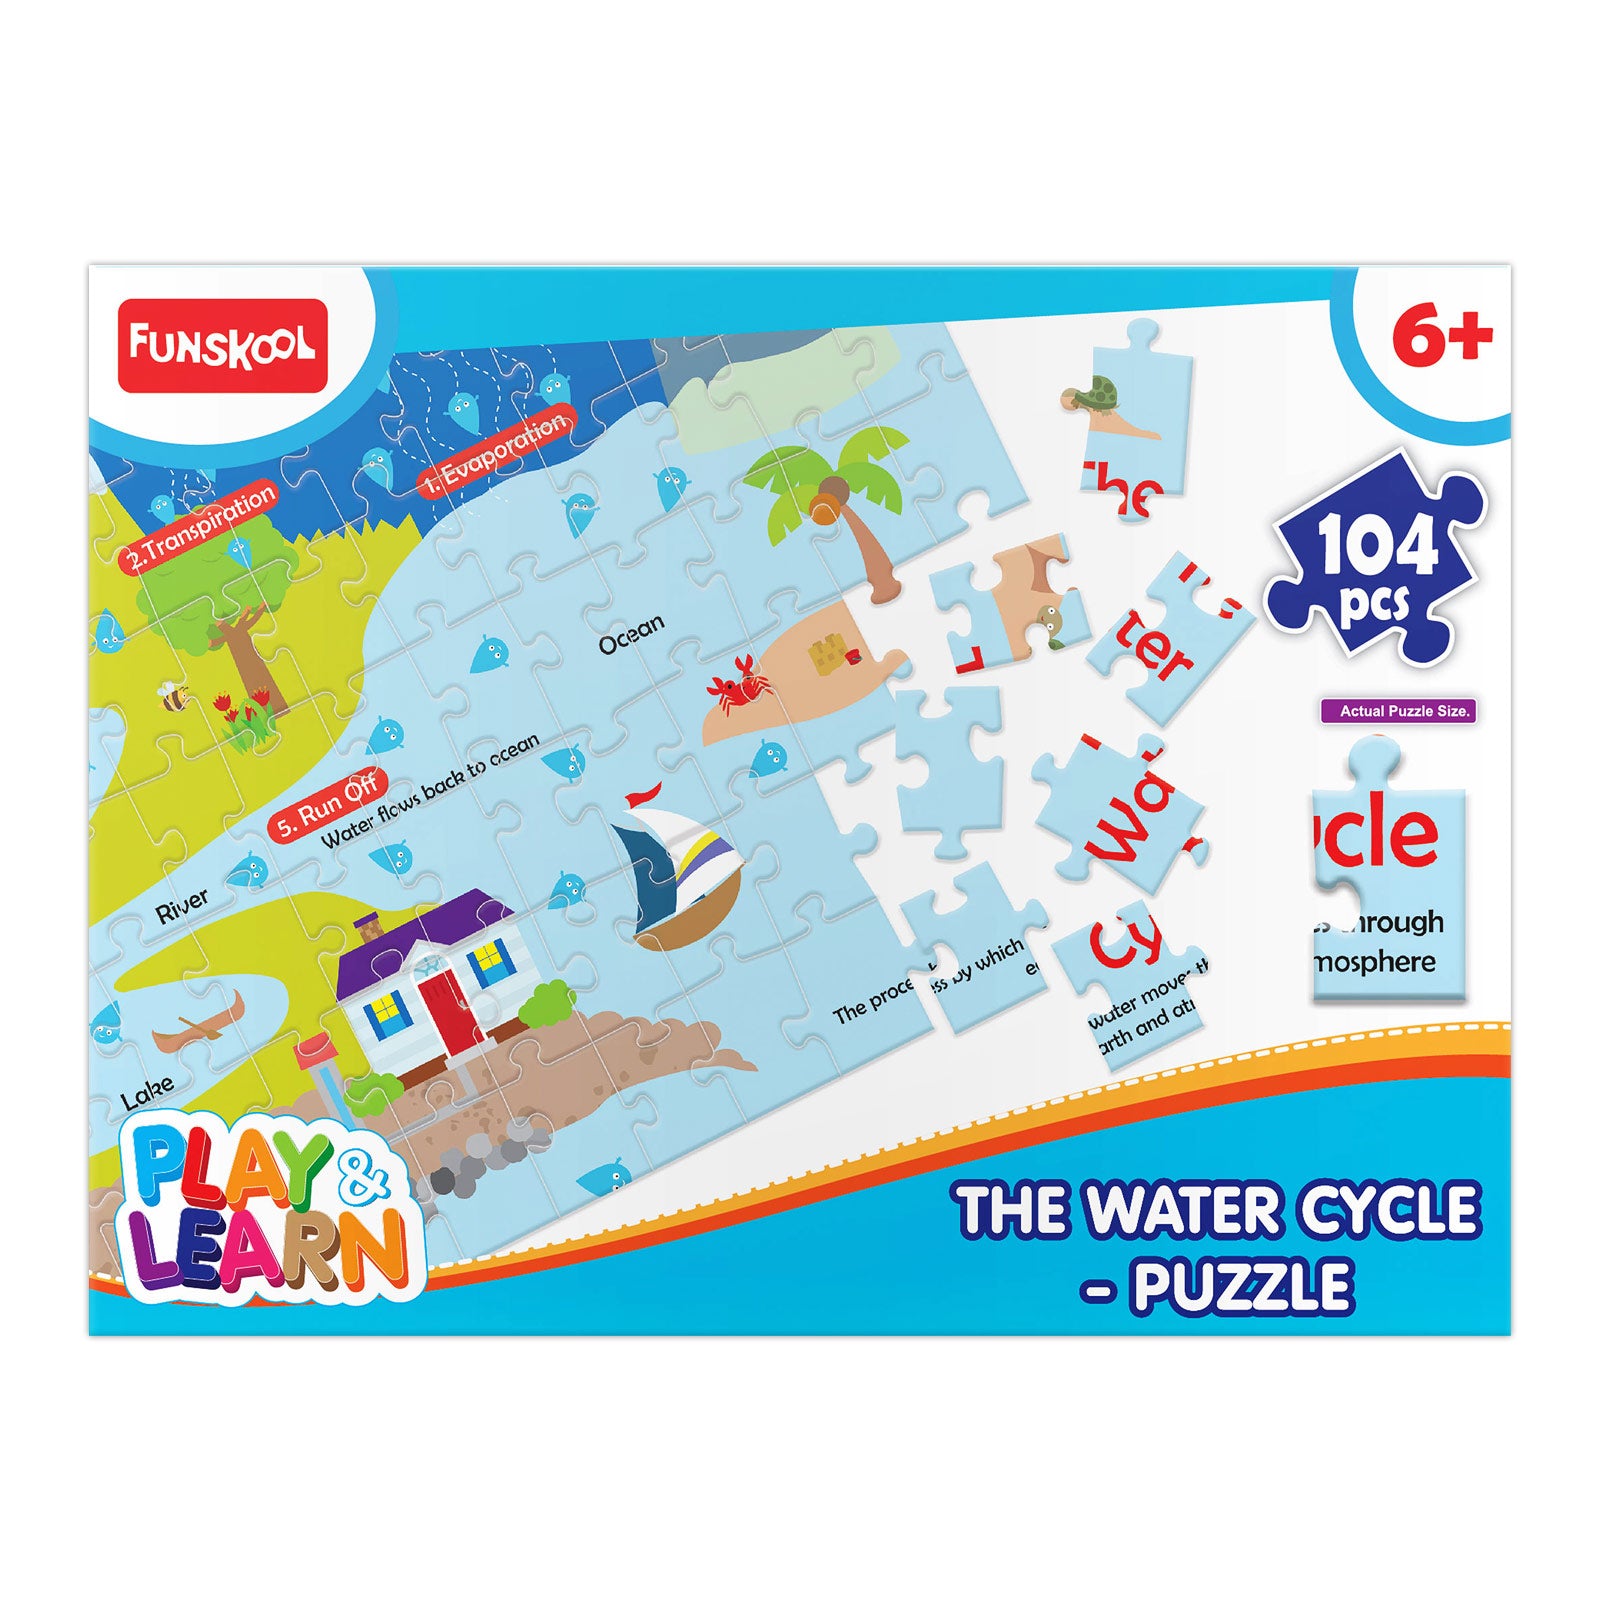 FUNSKOOL The Water Cycle puzzle